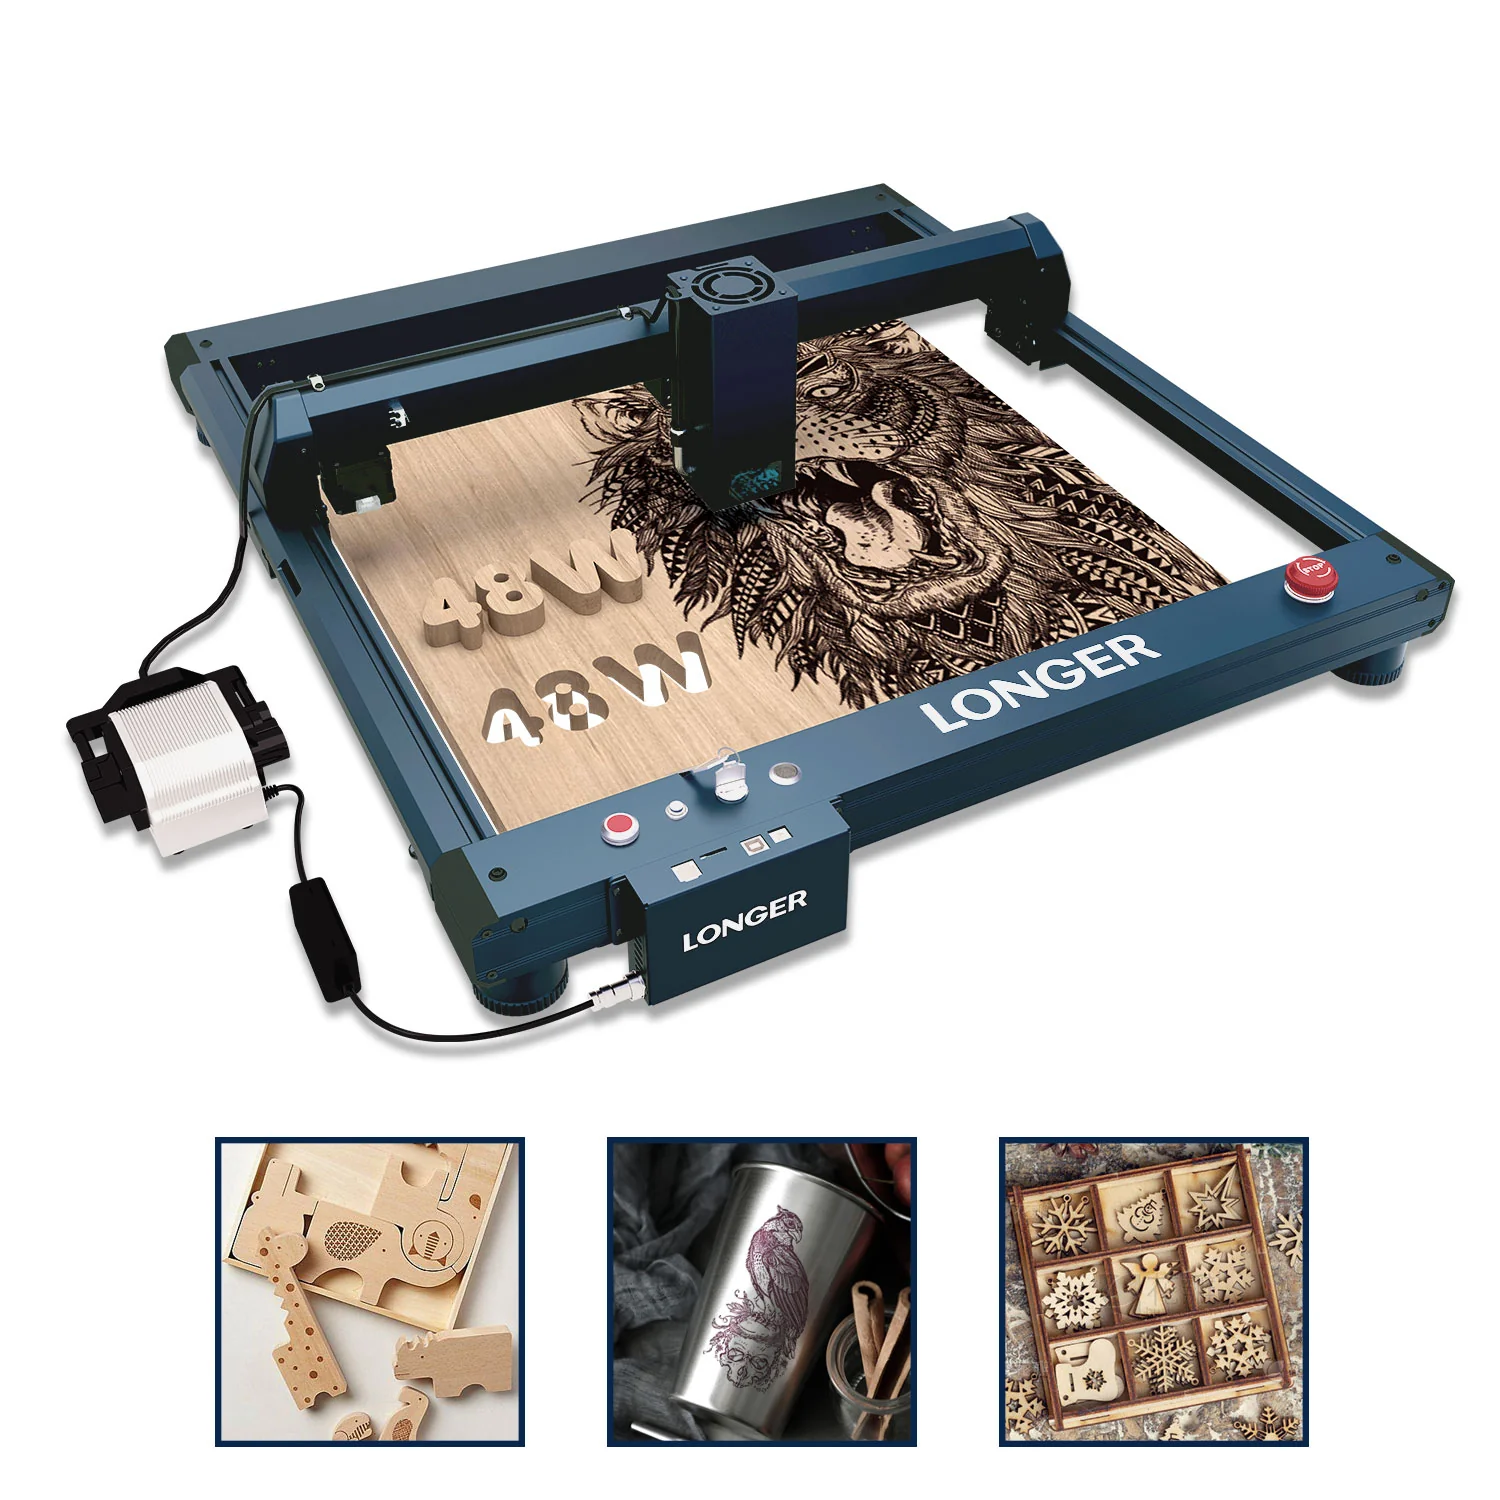 TTS-55 40W Laser Engraver Machine Laser Cutter Laser Cutting Engraving Tool  for Wood Metal Aluminum Glass Leather 